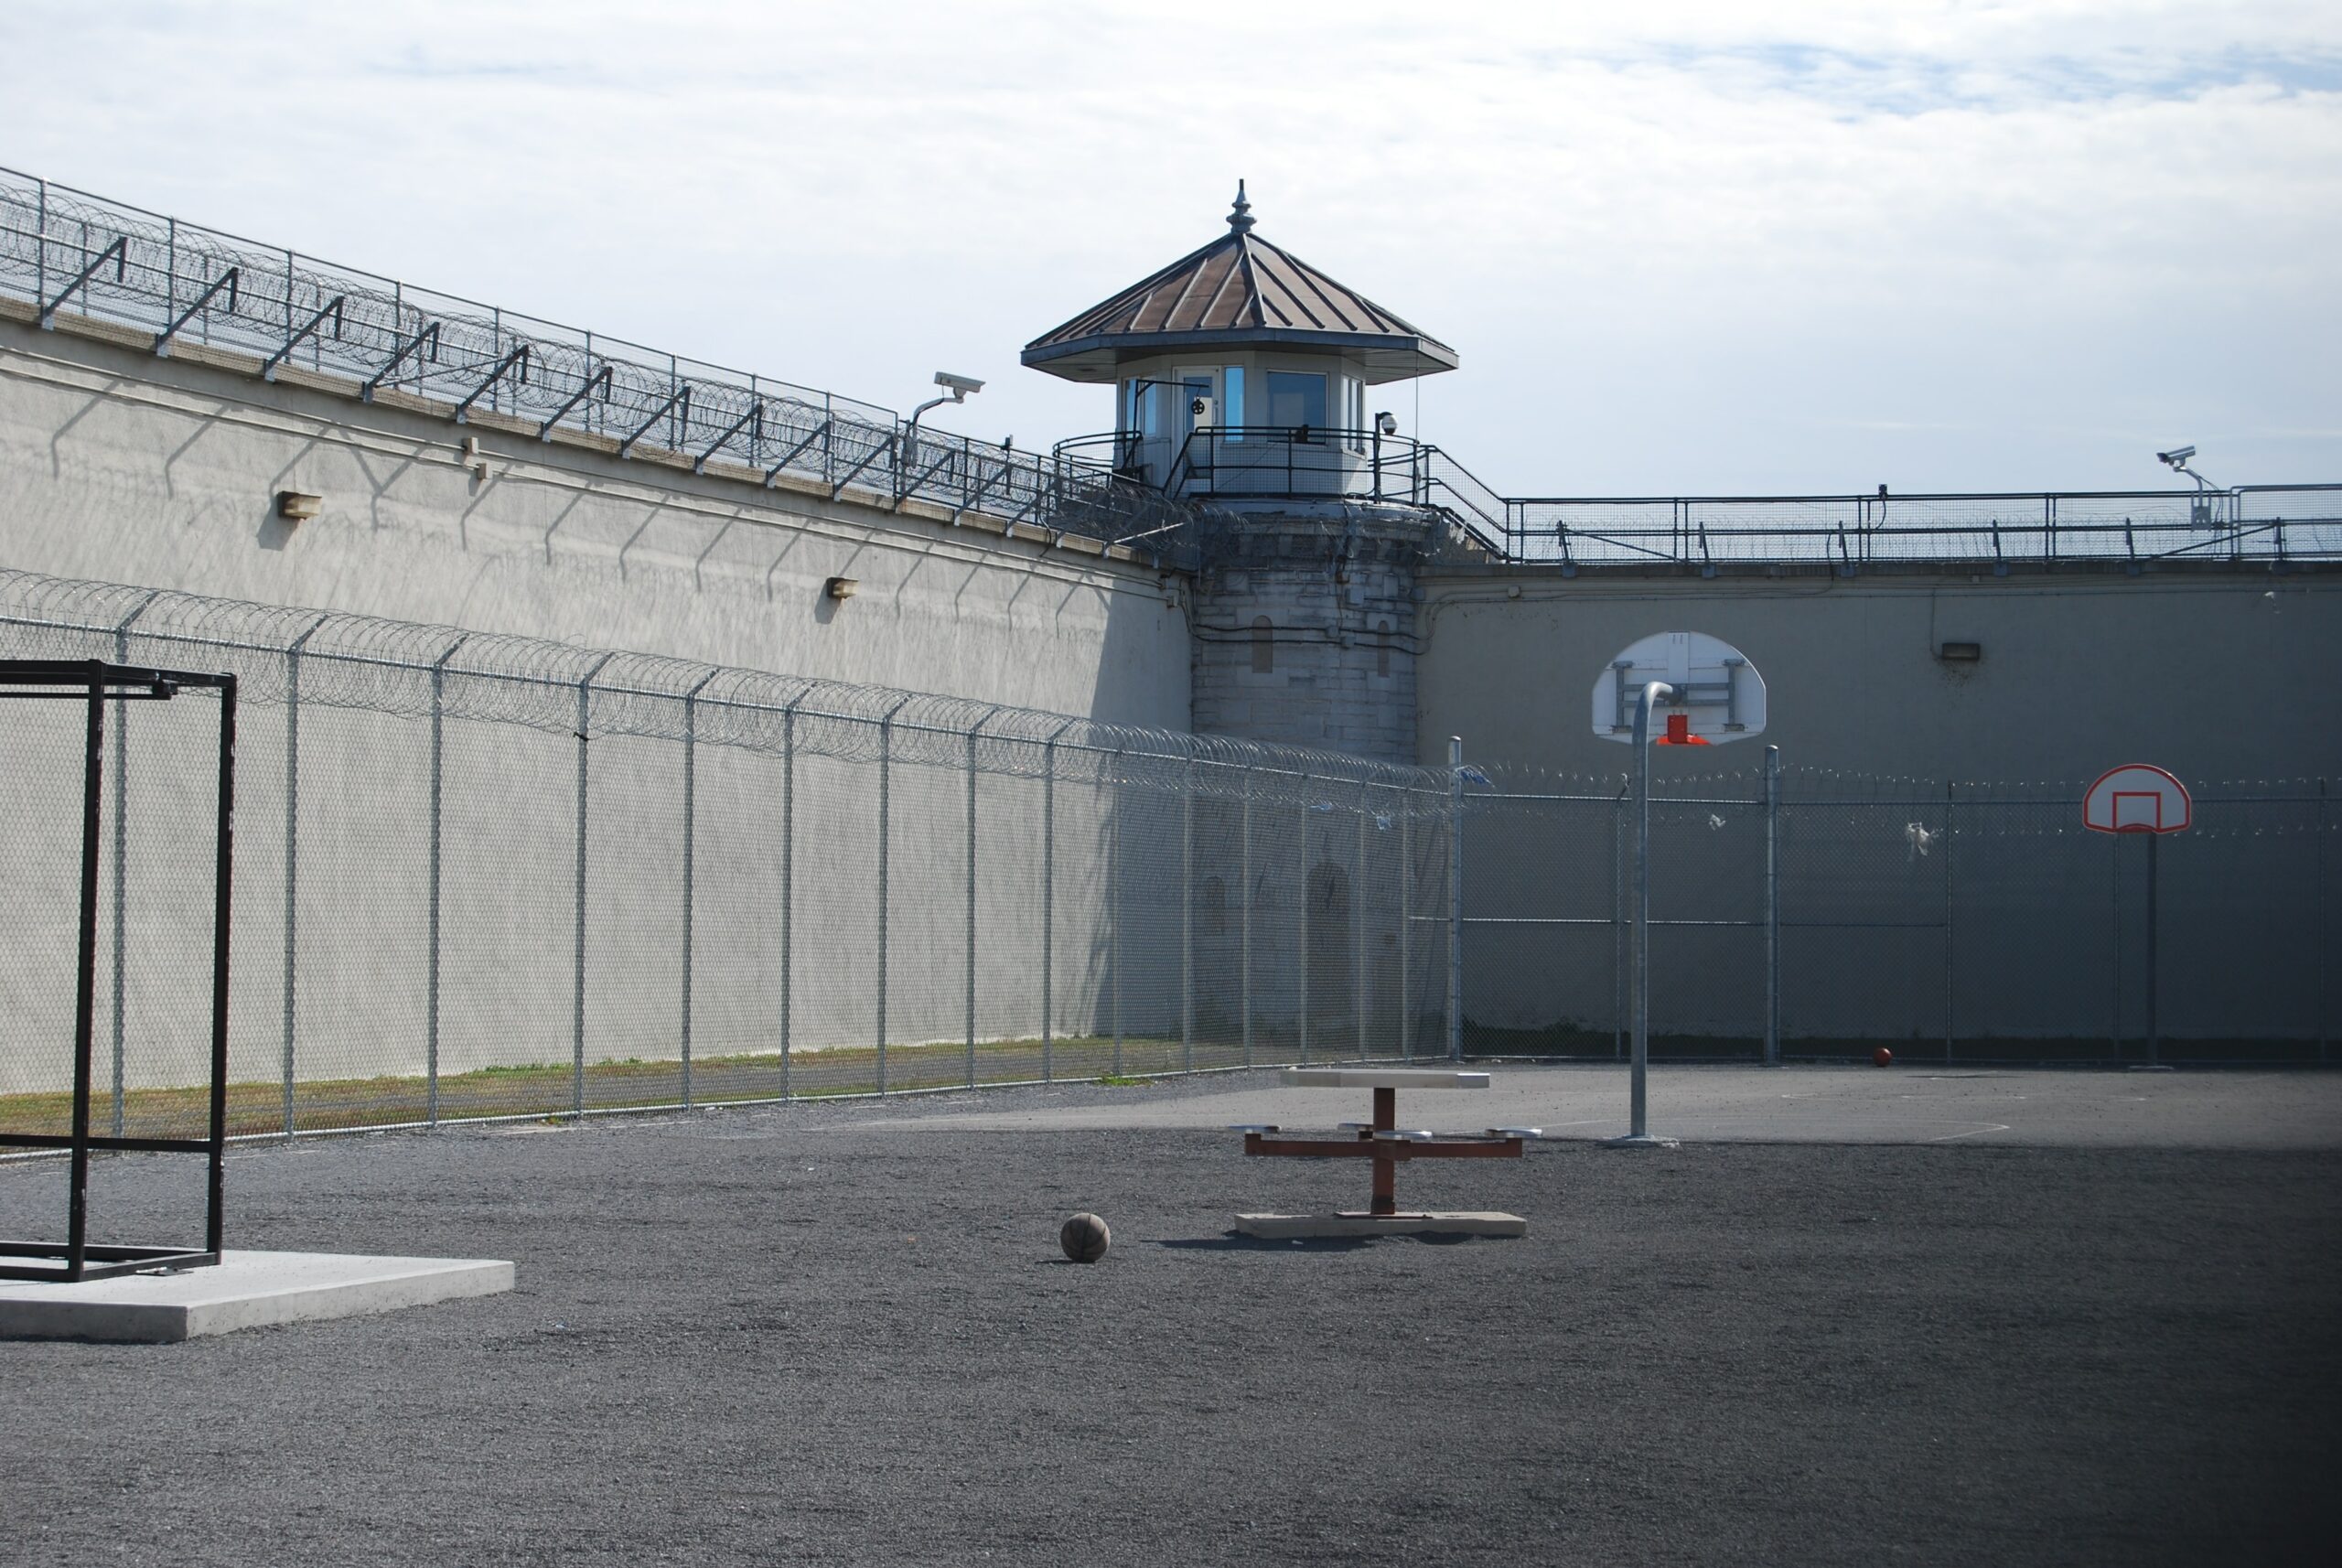 The photo is of the outside of a Canadian prison. A basketball sits in front of a basketball hoop in a gravel field, surrounded by fencing. No people can be seen.